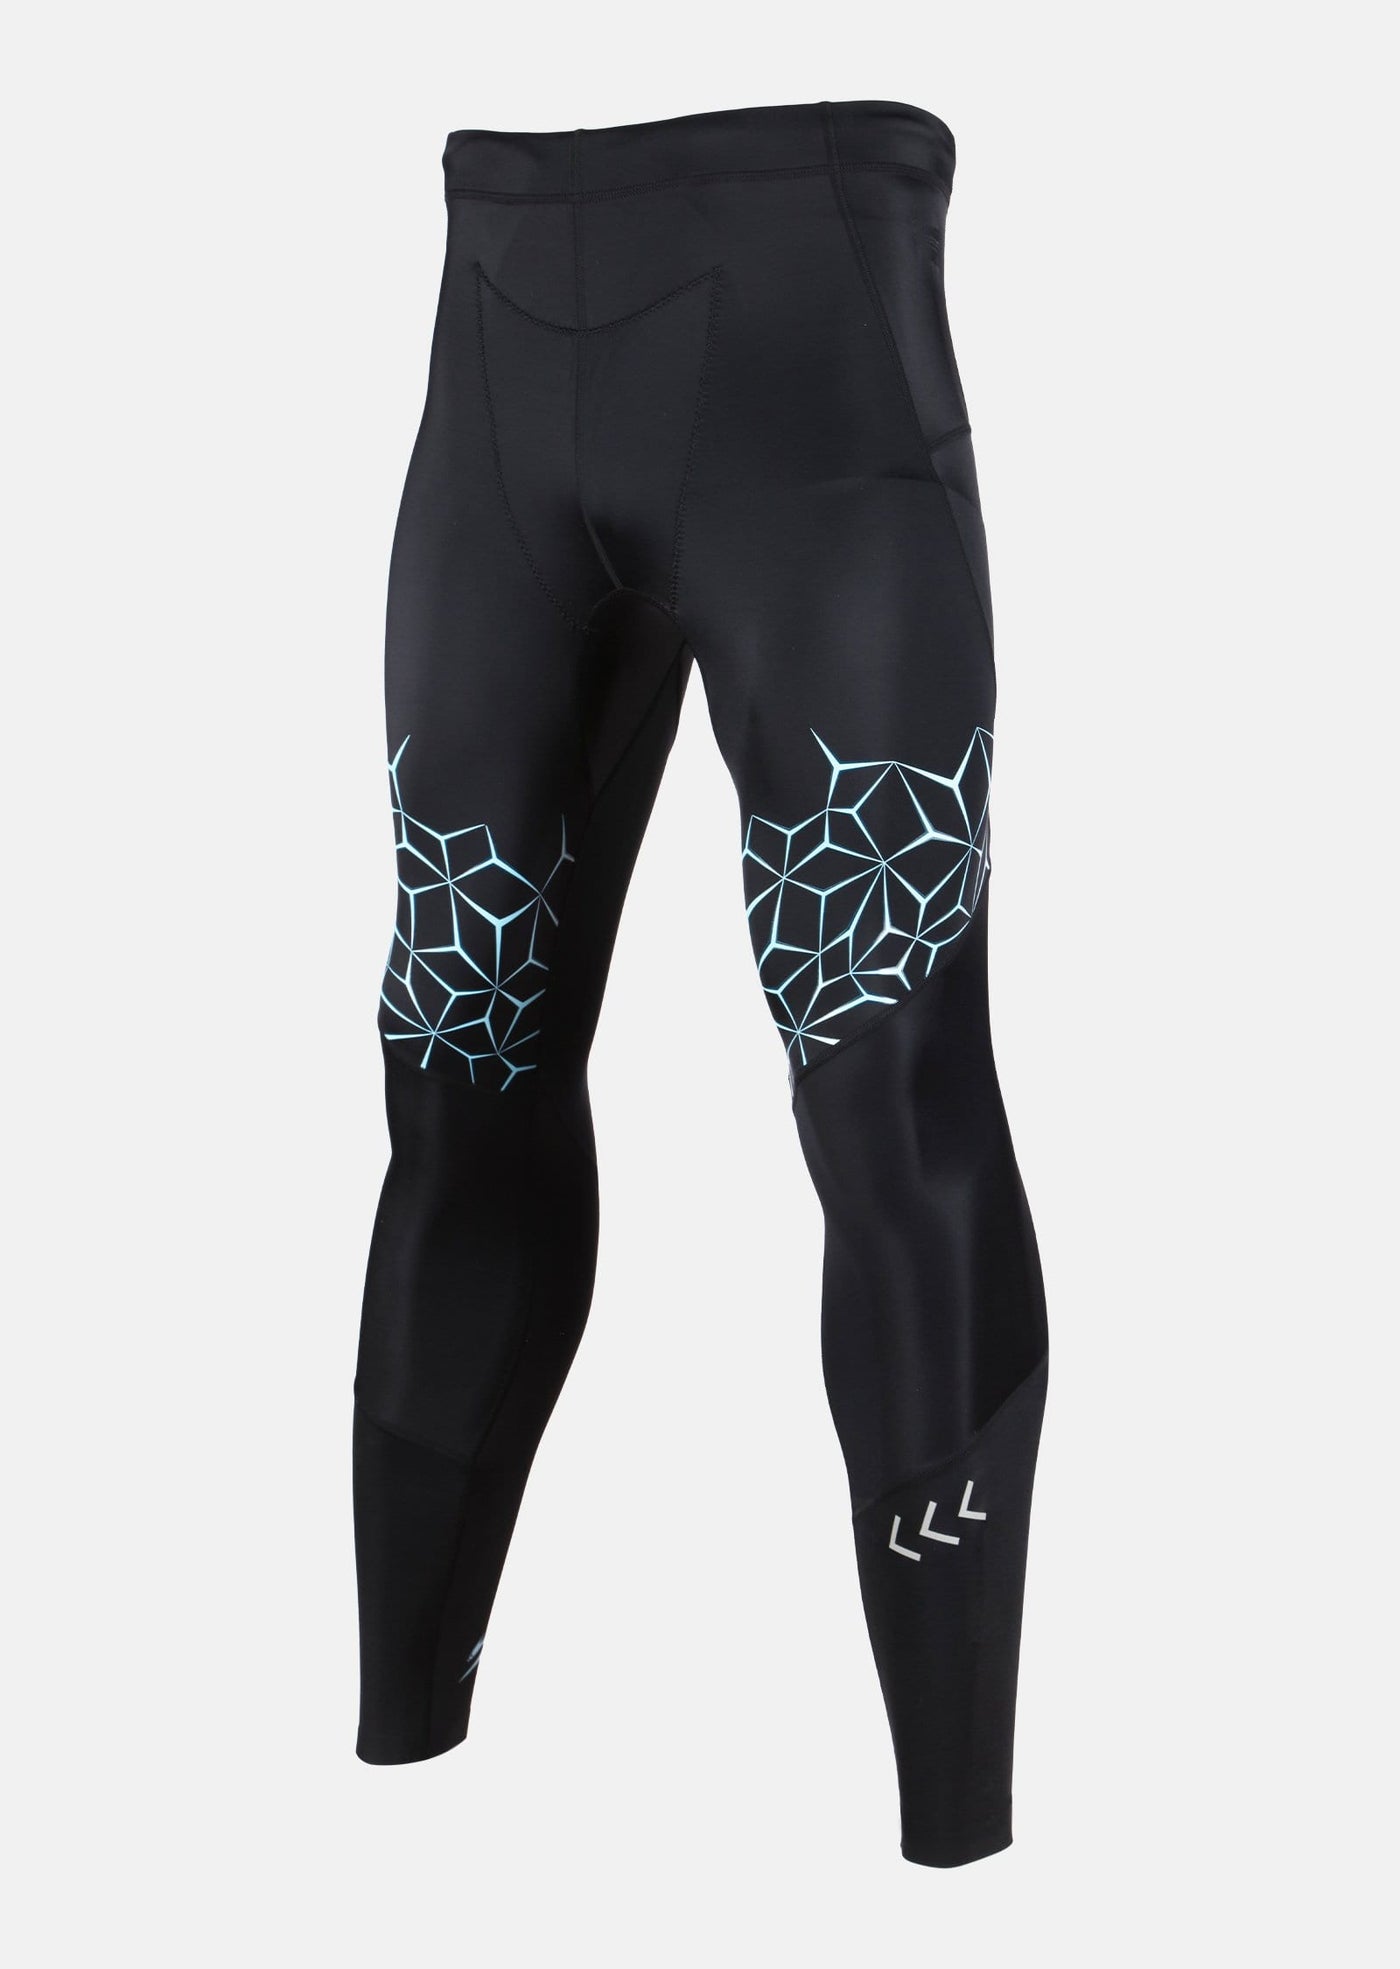 D1 Men's Compression Fitted 3/4 Tights